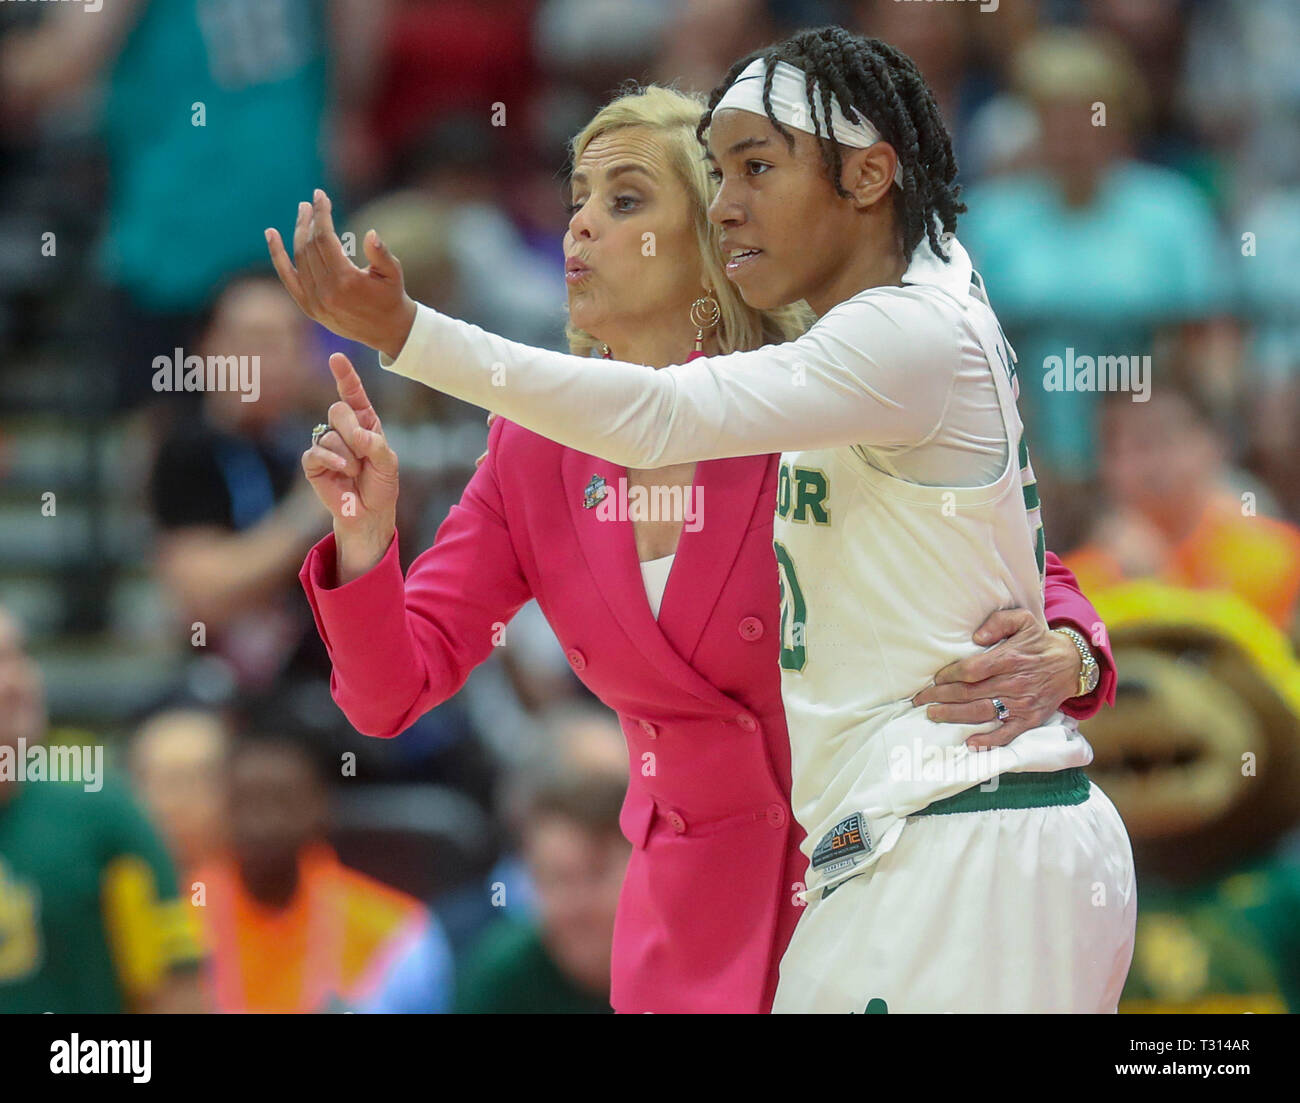 Tampa, Florida, USA. 5th Apr, 2019. DIRK SHADD | Times.Baylor Lady Bears guard Juicy Landrum (20), right, and Baylor Lady Bears head coach Kim Mulkey talk to the their team in the final seconds of their 72-67 win over Oregon Ducks in their NCAA Women's Final Four semi-final game Friday, April 5, 2019 in Tampa. Credit: Dirk Shadd/Tampa Bay Times/ZUMA Wire/Alamy Live News Stock Photo